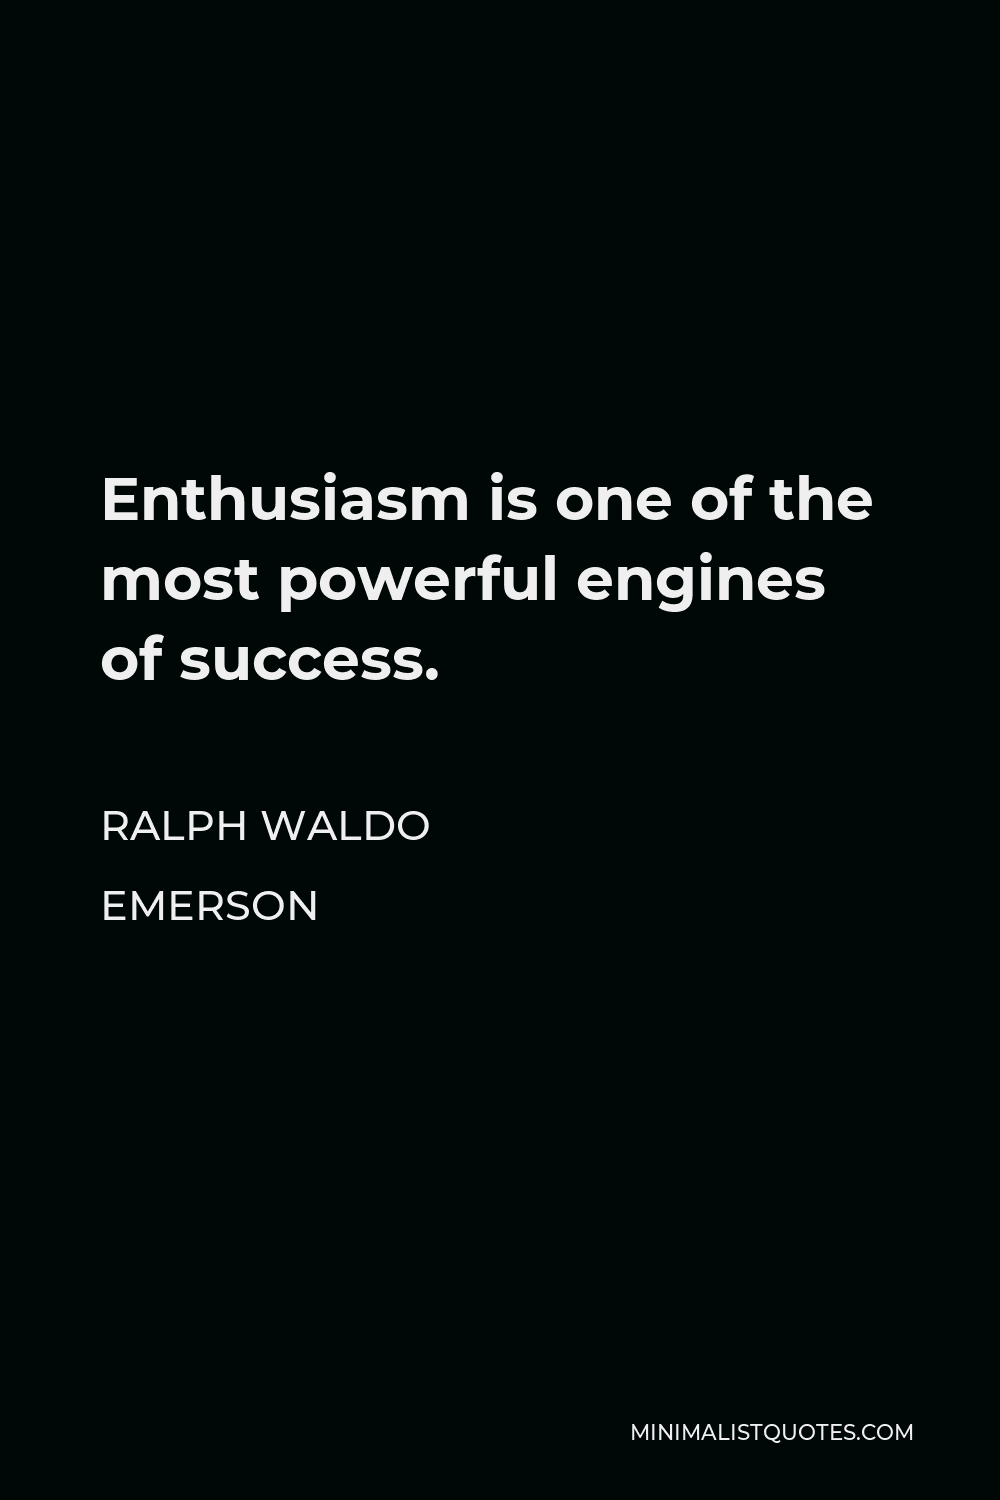 Ralph Waldo Emerson Quote - Enthusiasm is one of the most powerful engines of success.